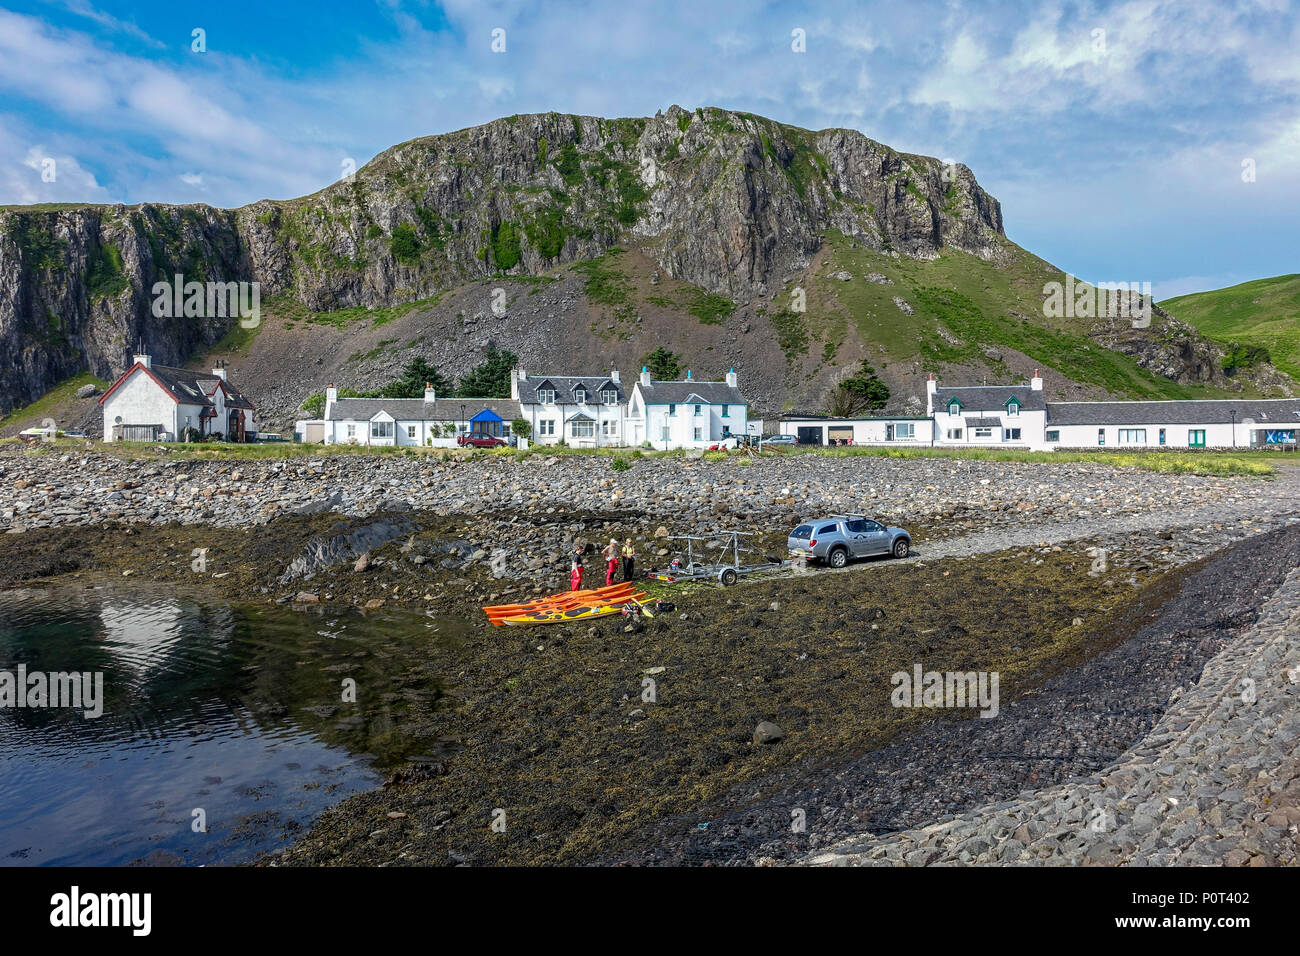 Kayaks being picked up in harbour in village of Easdale on the island of Seil south of  Oban Argyll & Bute Scotland UK Stock Photo